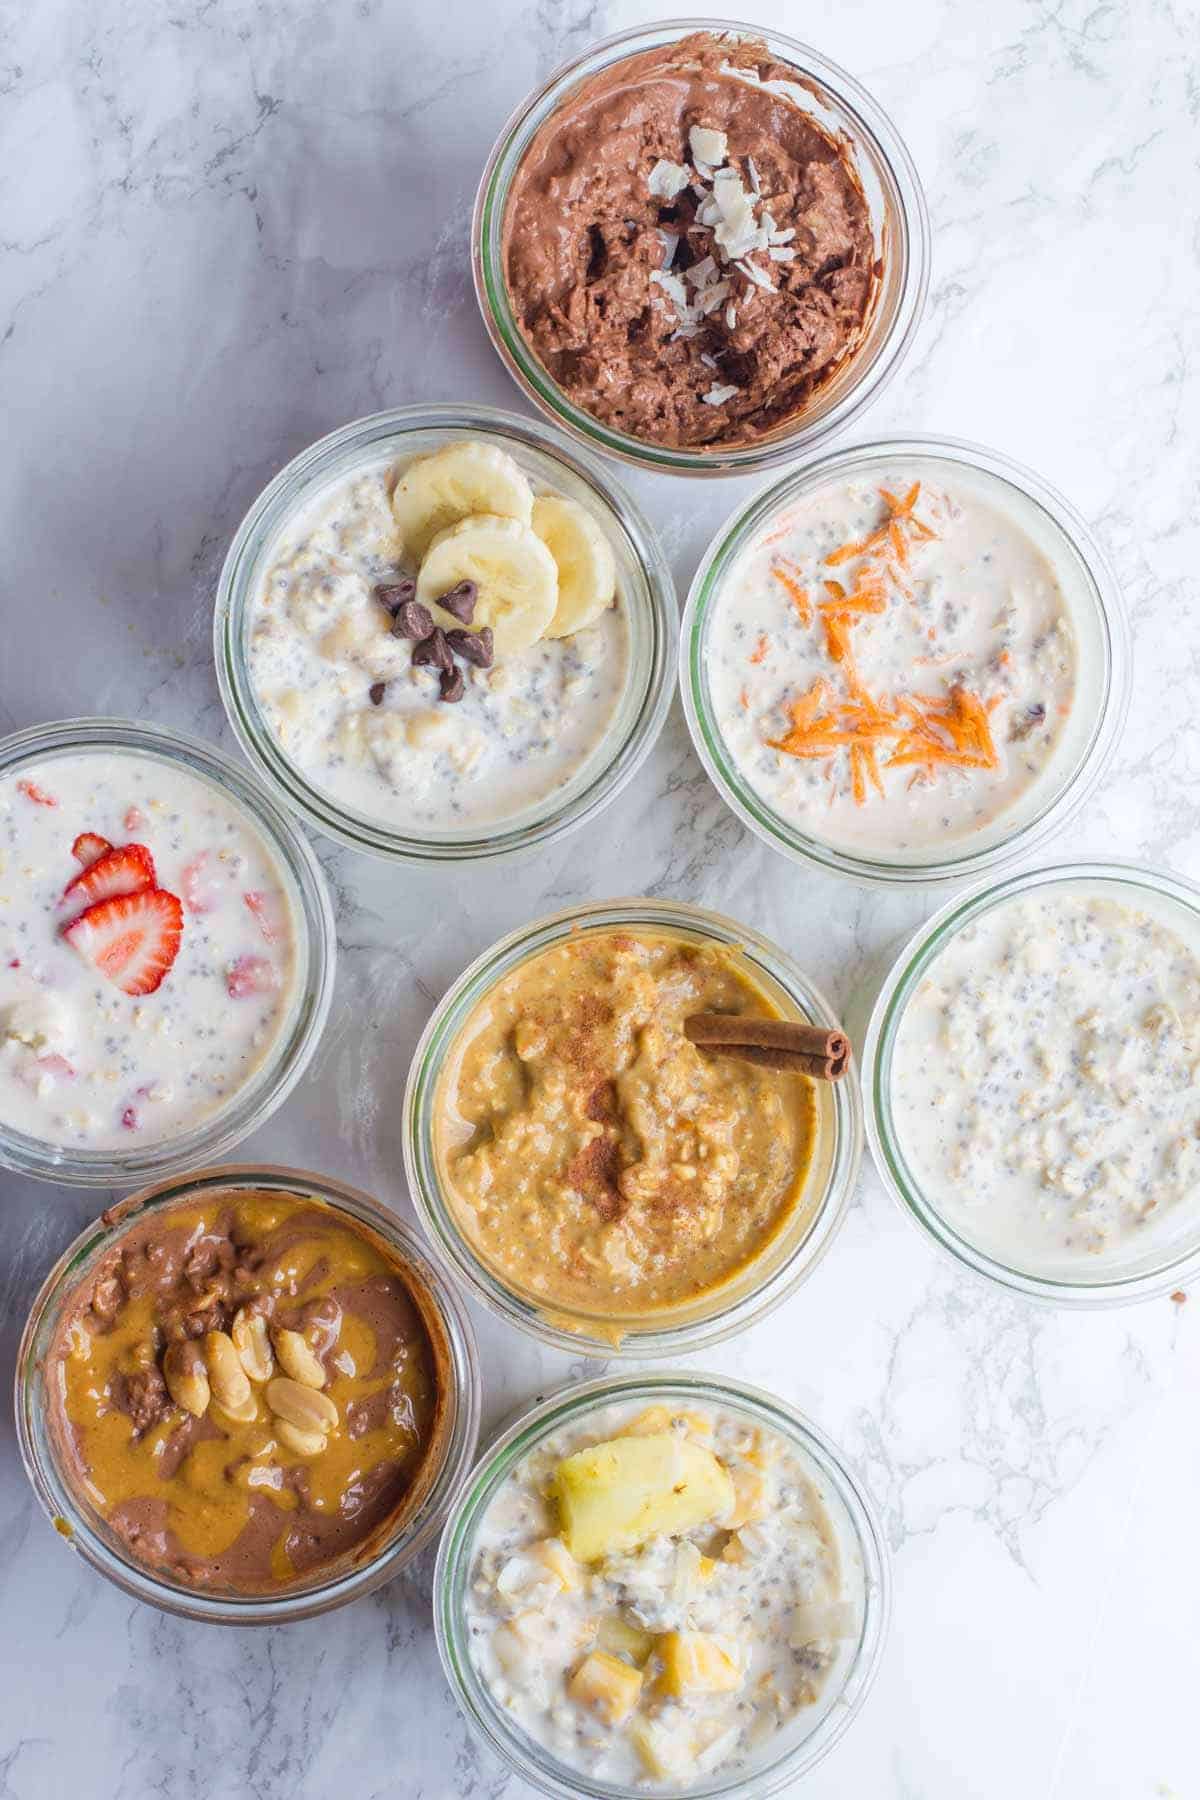 8 Classic Overnight Oats Recipes You Should Try